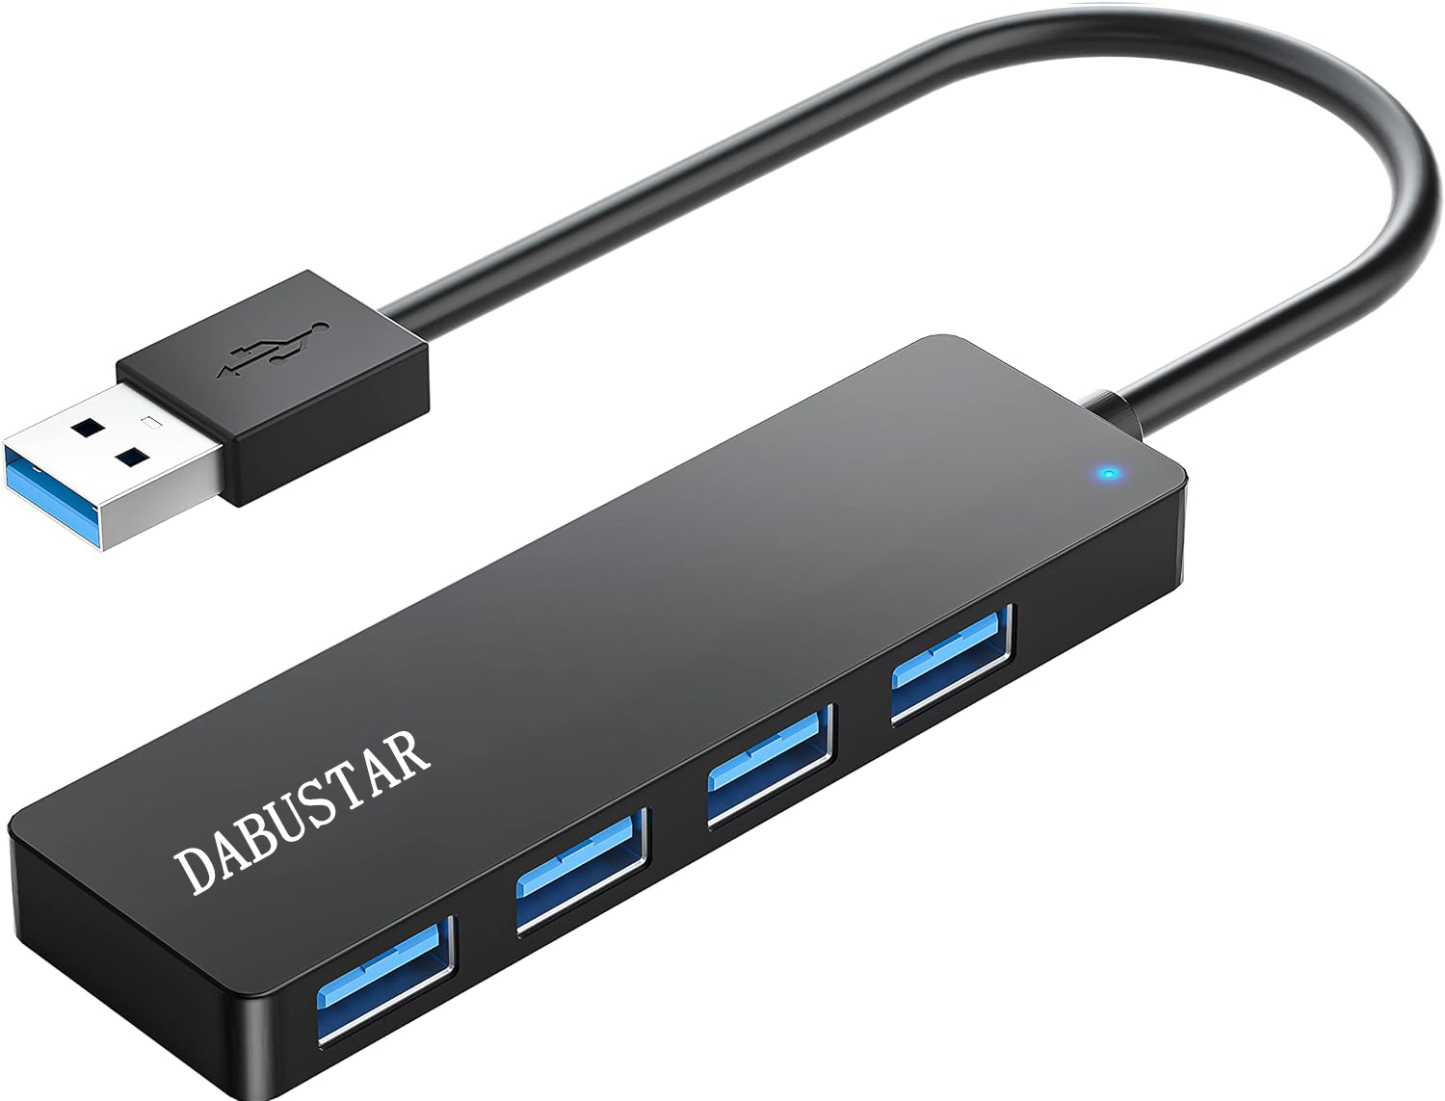 DABUSTAR Computer peripherals , 4 Port USB 3.0 Hub, Ultra Slim Portable Data Hub Applicable for iMac Pro, MacBook Air, Mac Mini/Pro, Surface Pro, Notebook PC, Laptop, USB Flash Drives, and Mobile HDD (Leather Black)